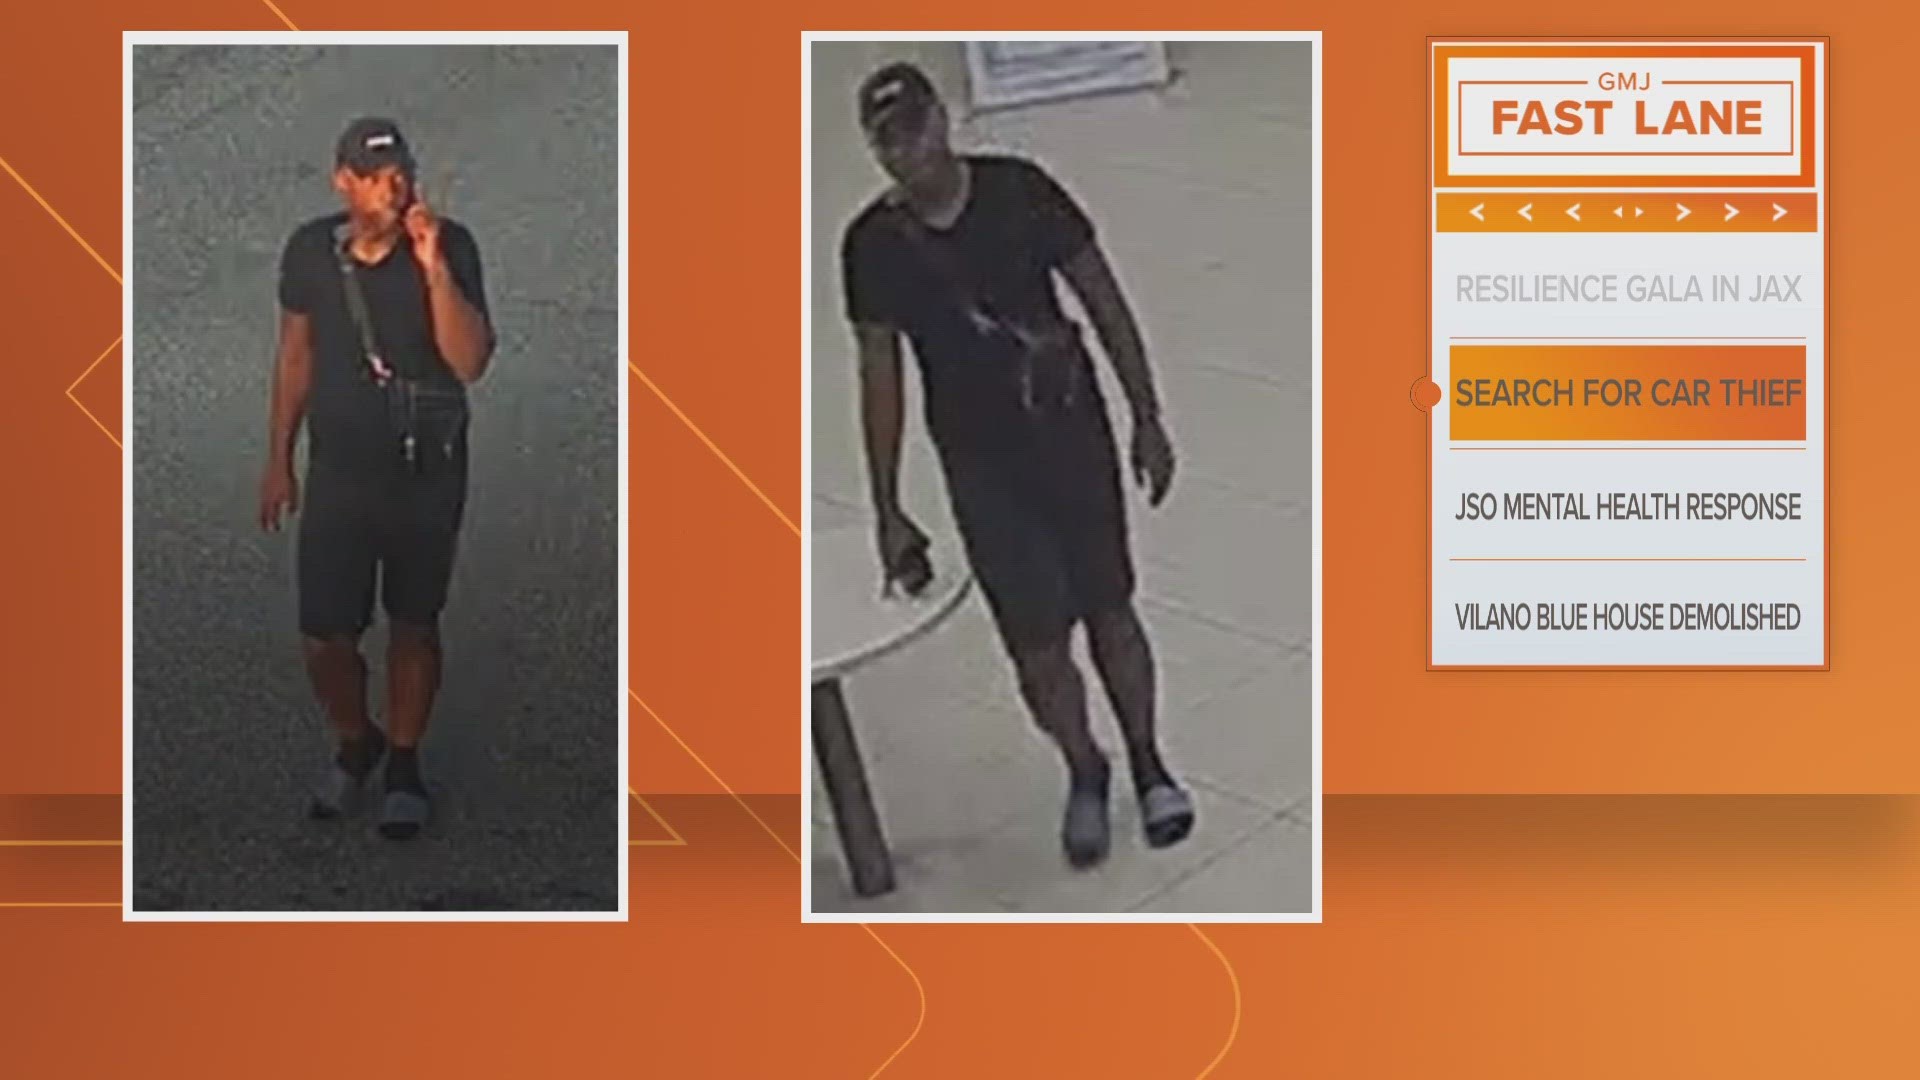 The man is accused of stealing a white Jeep Compass off the lot of a car dealership. If you have any information on him, call Crime Stoppers at 1-866-845-TIPS.